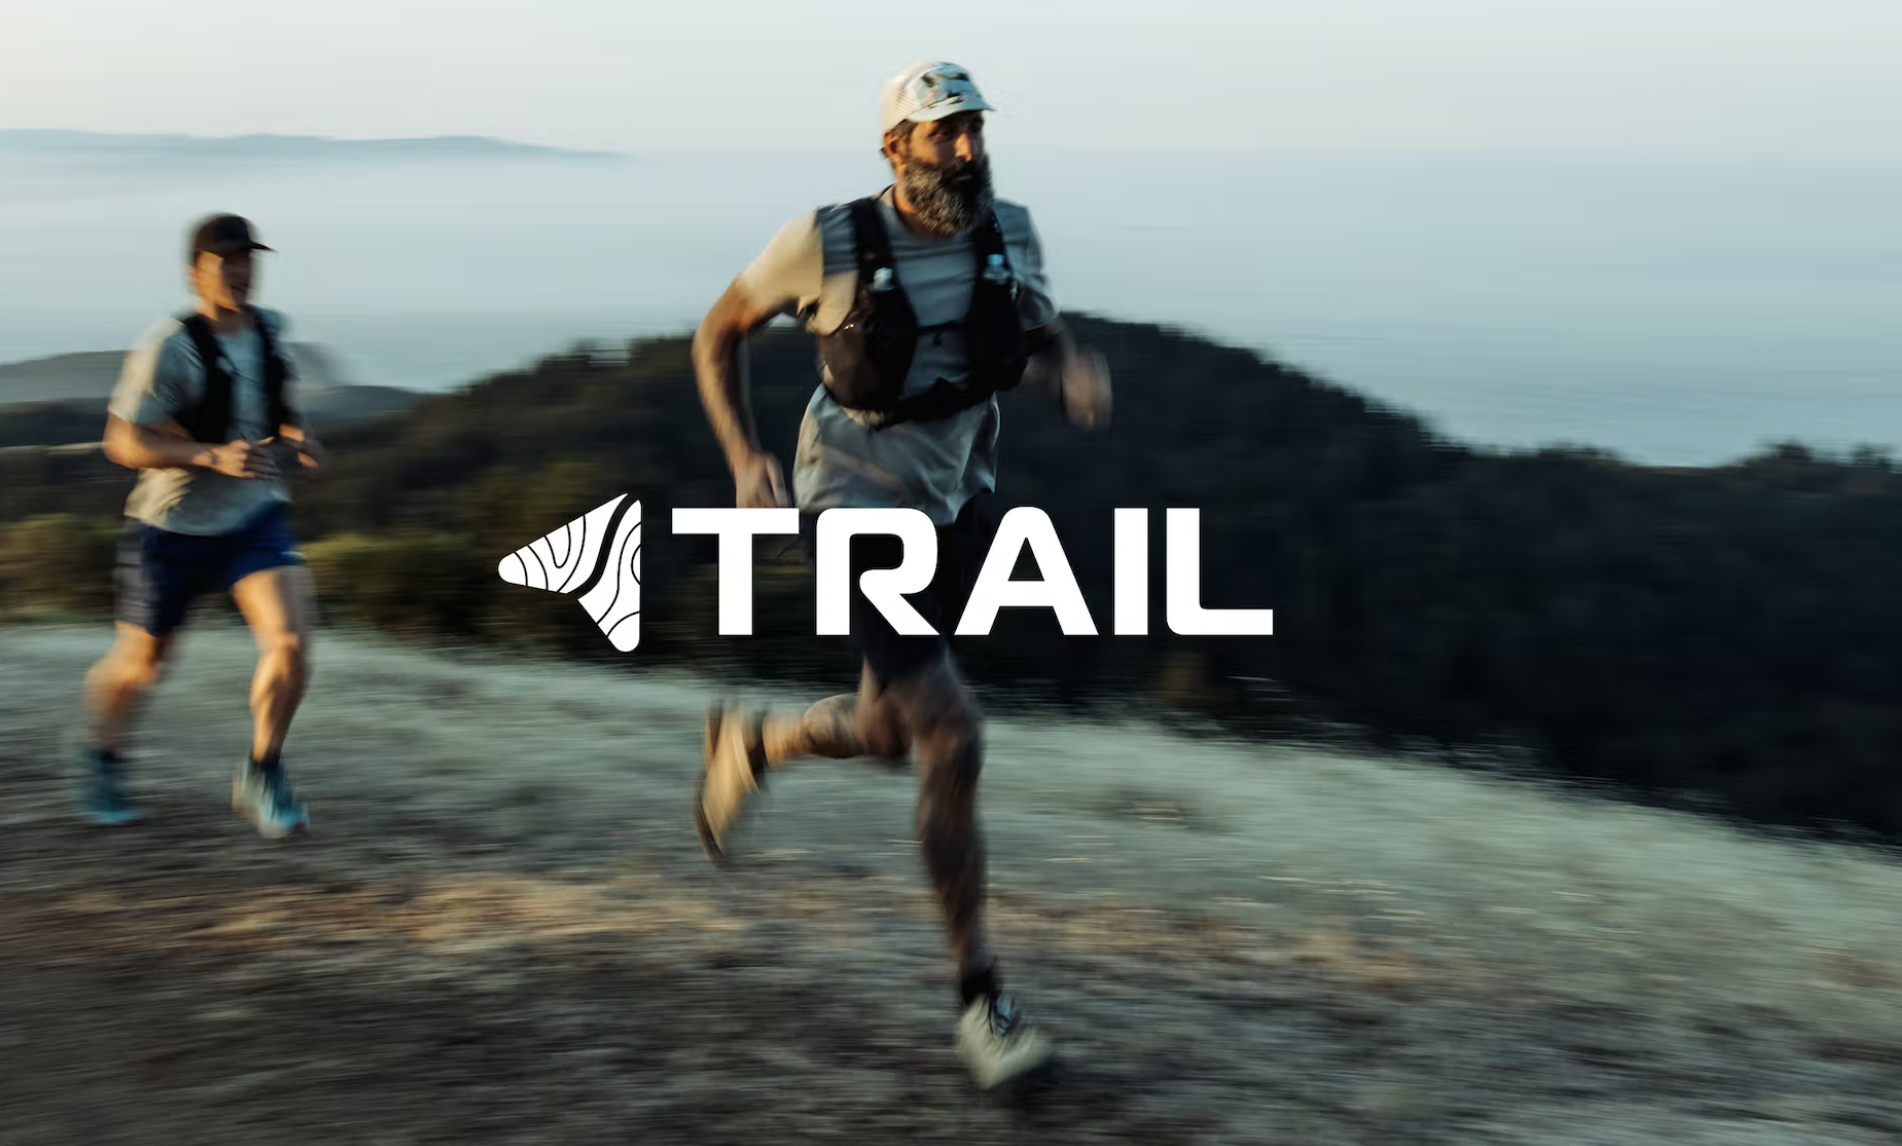 Let's Get Going Outdoors With TRAIL by Proof Activewear - BroBible